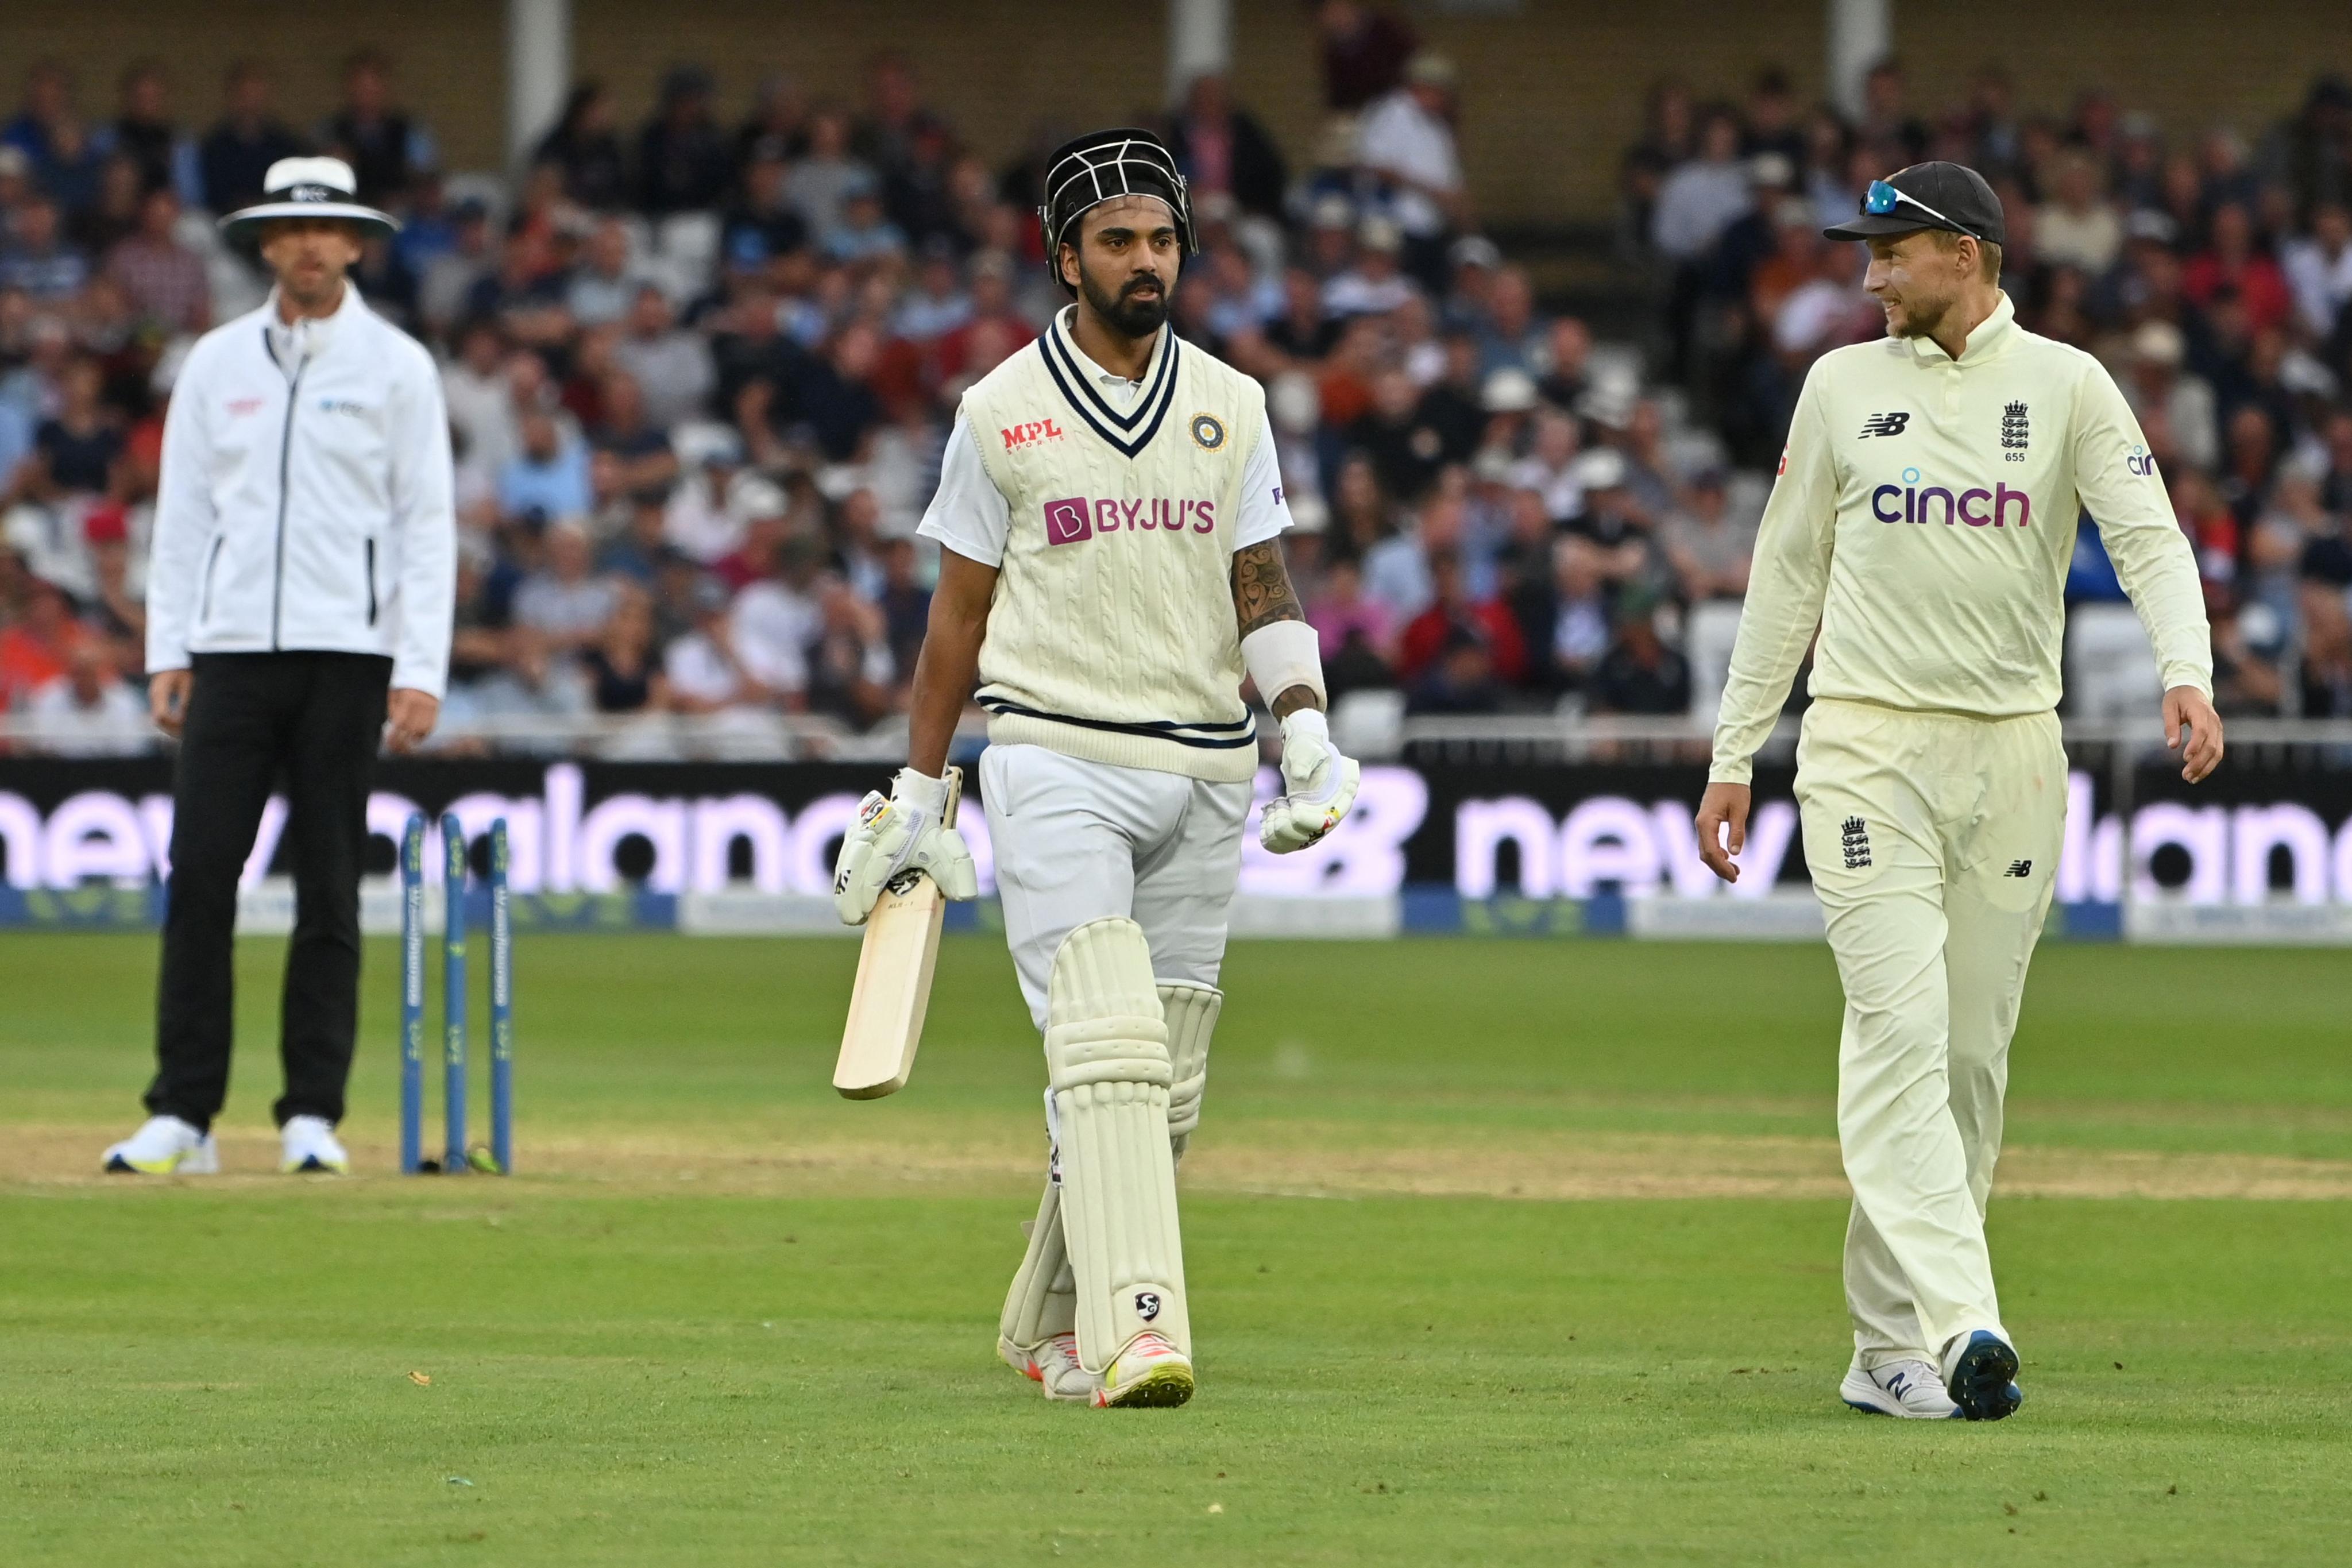 ENG vs IND | Trent Bridge Day 2 Talking Points: Underutilised Sam Curran, India’s 30 minutes of struggle and Rahul's ultimate show